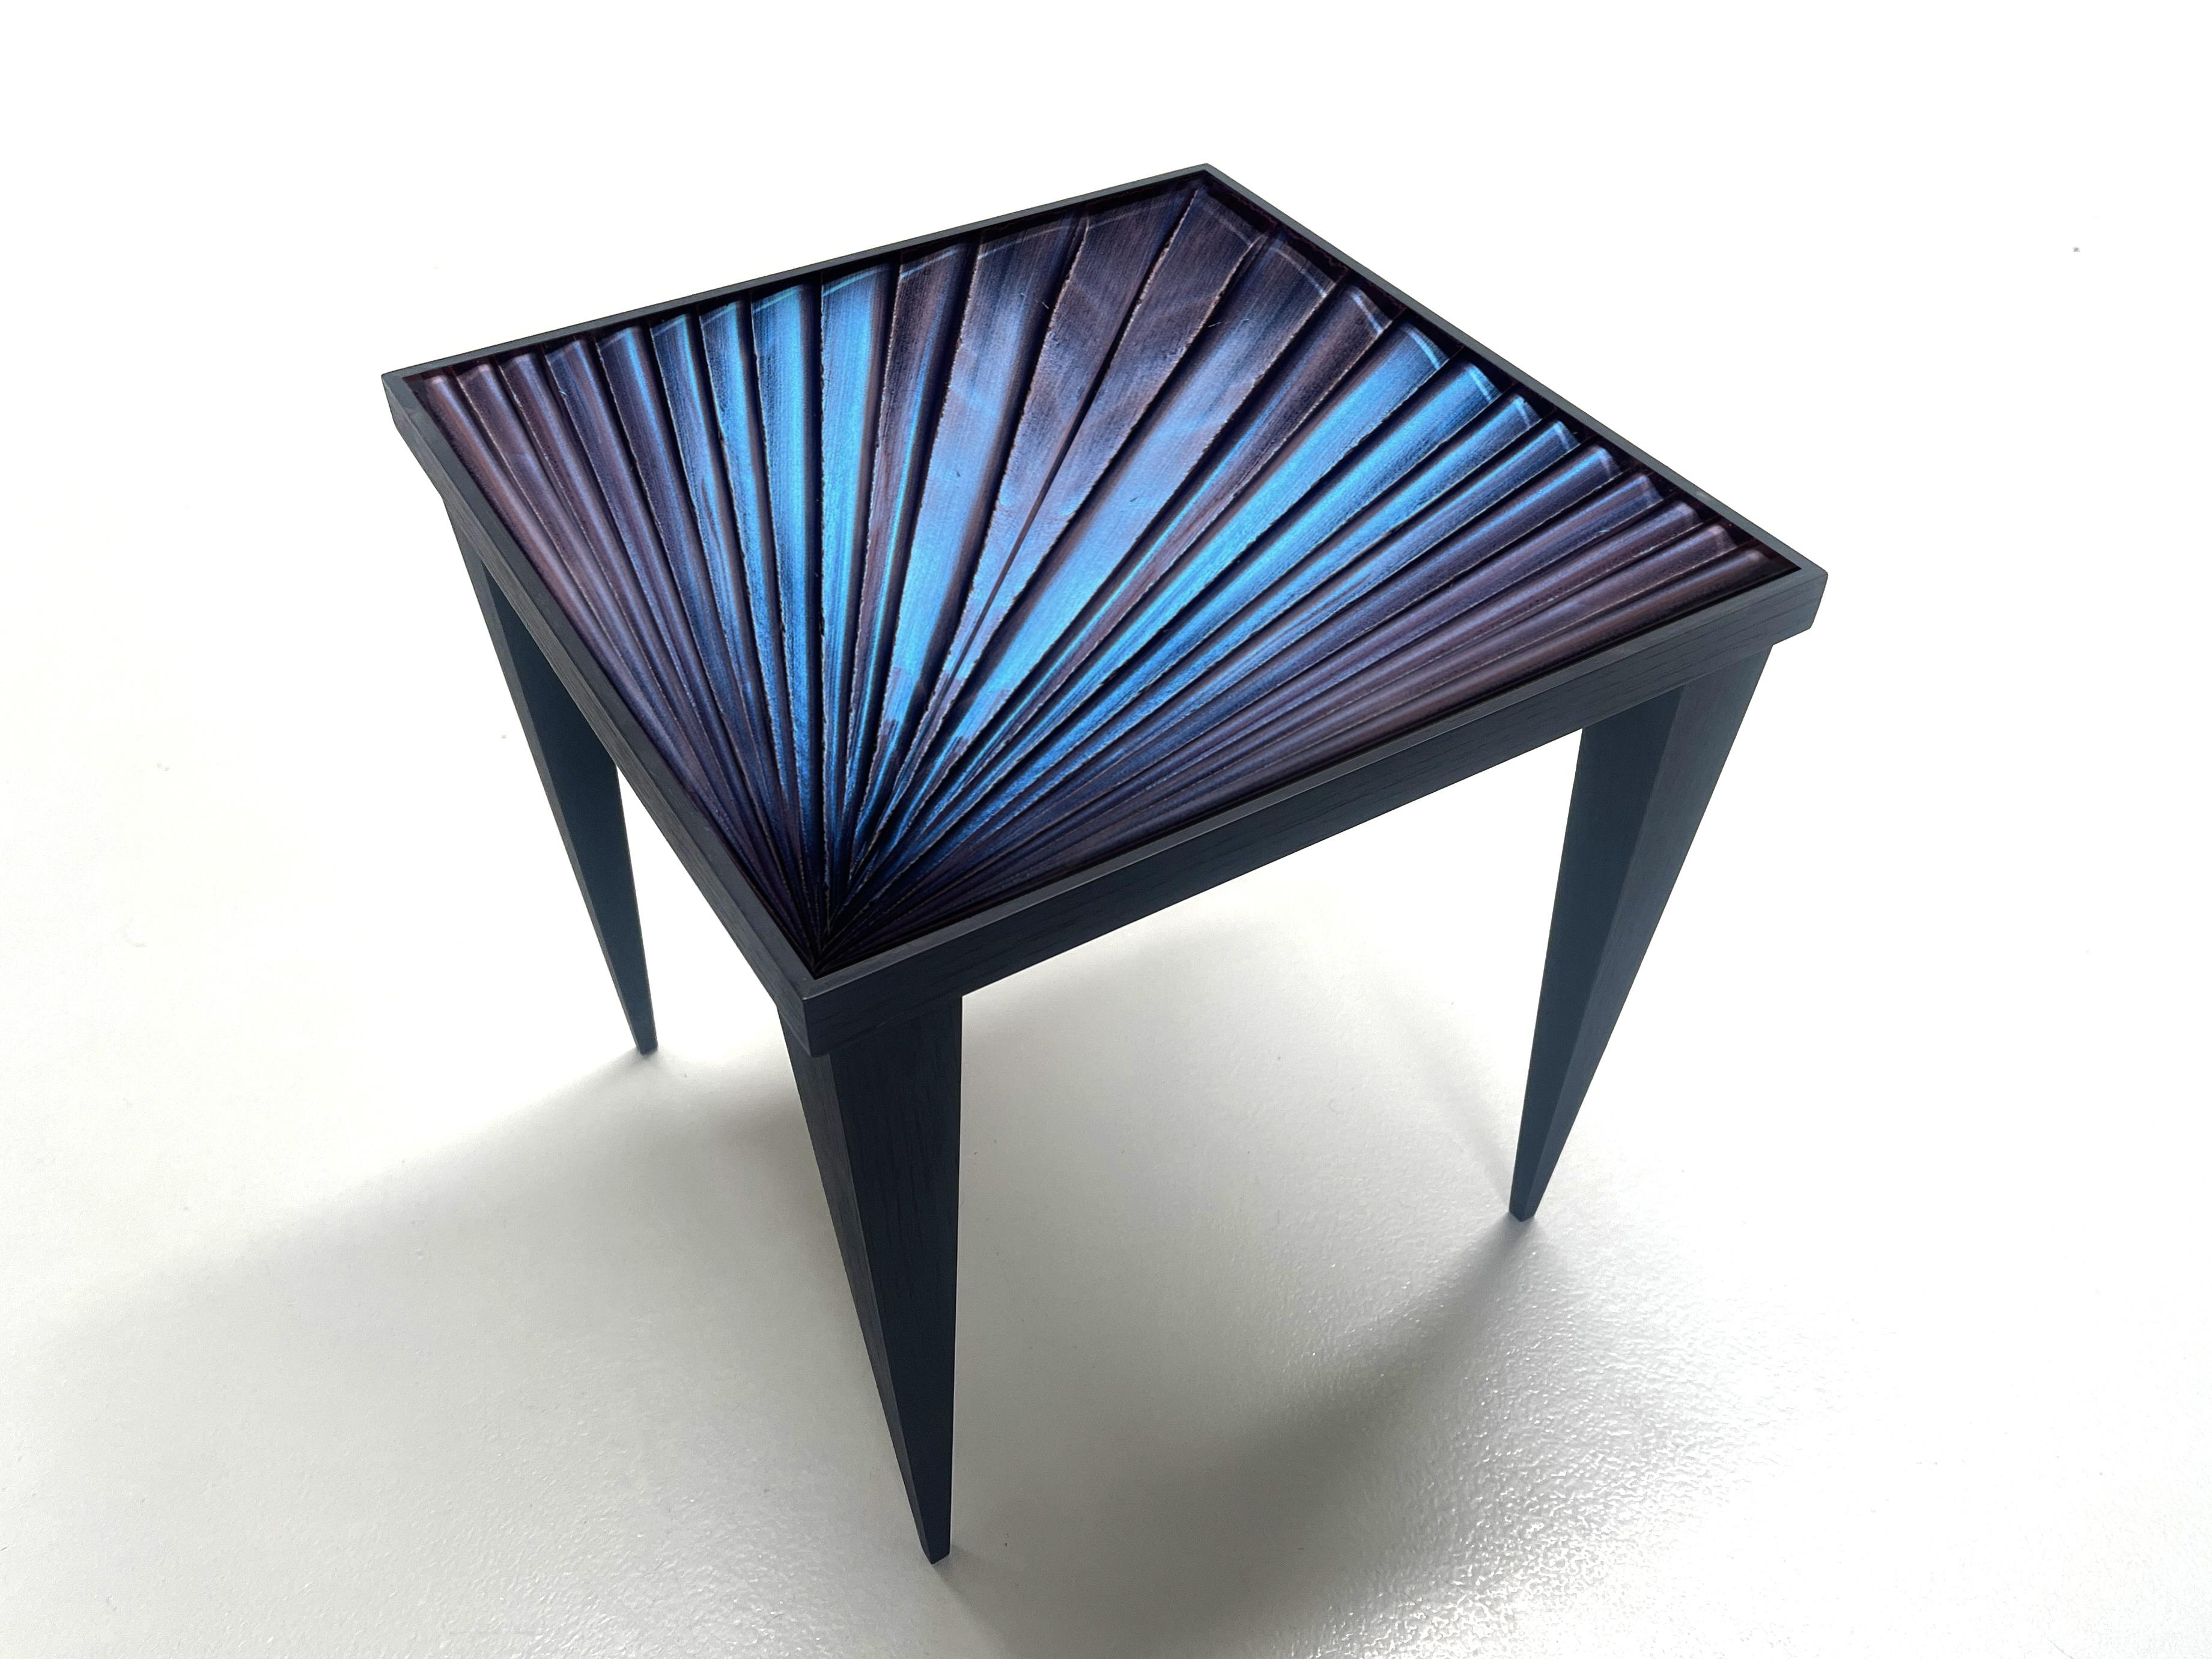 Modern Contemporary ‘Square’ Table Blue Crystal and Oak Wood Handmade by Ghirò Studio For Sale